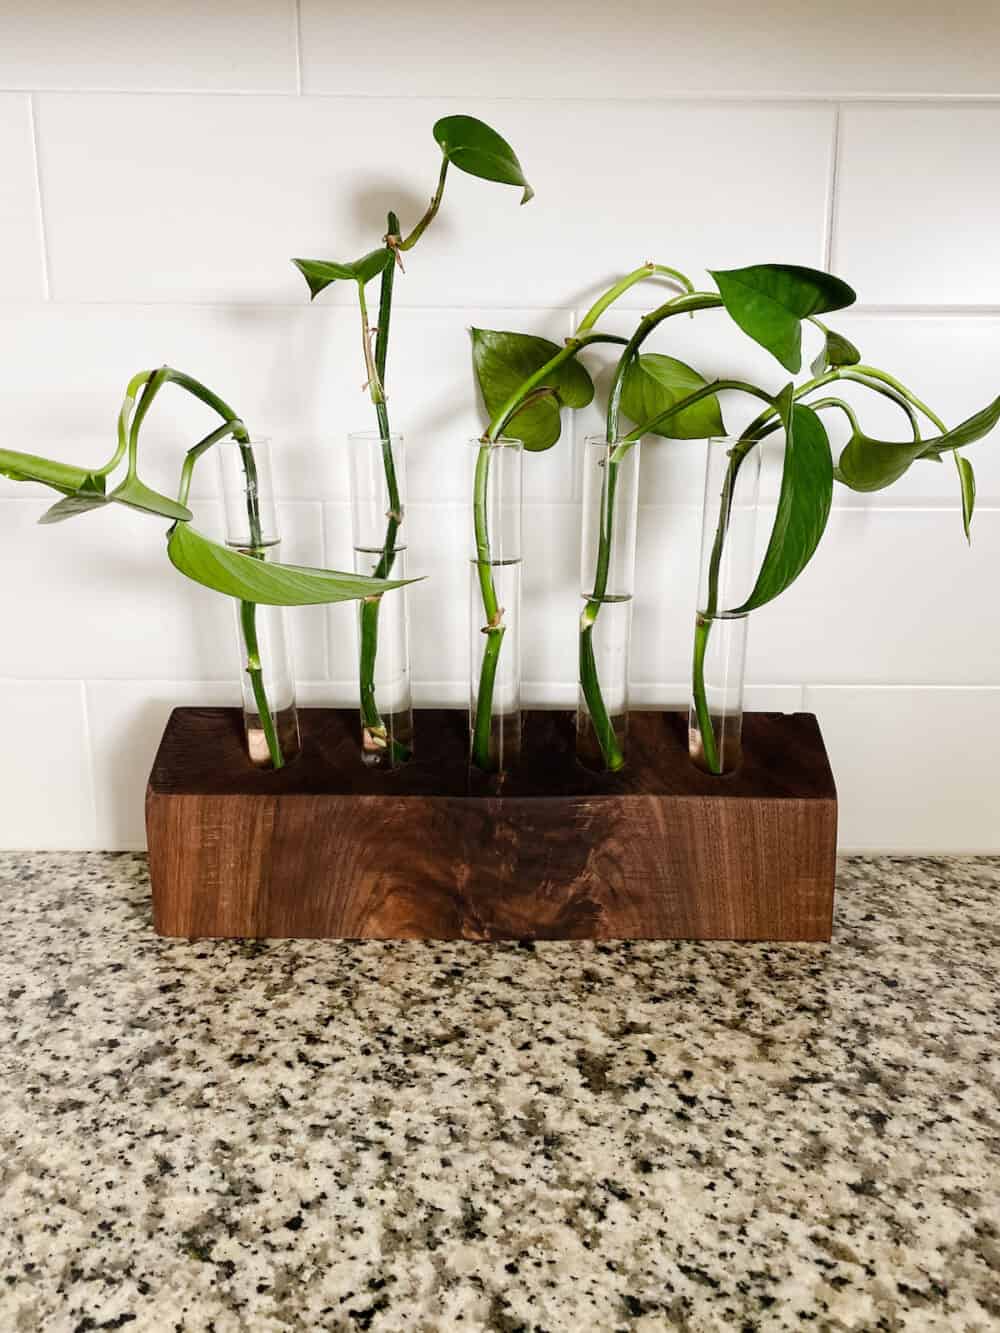 Walnut propagation station with pothos clippings in it